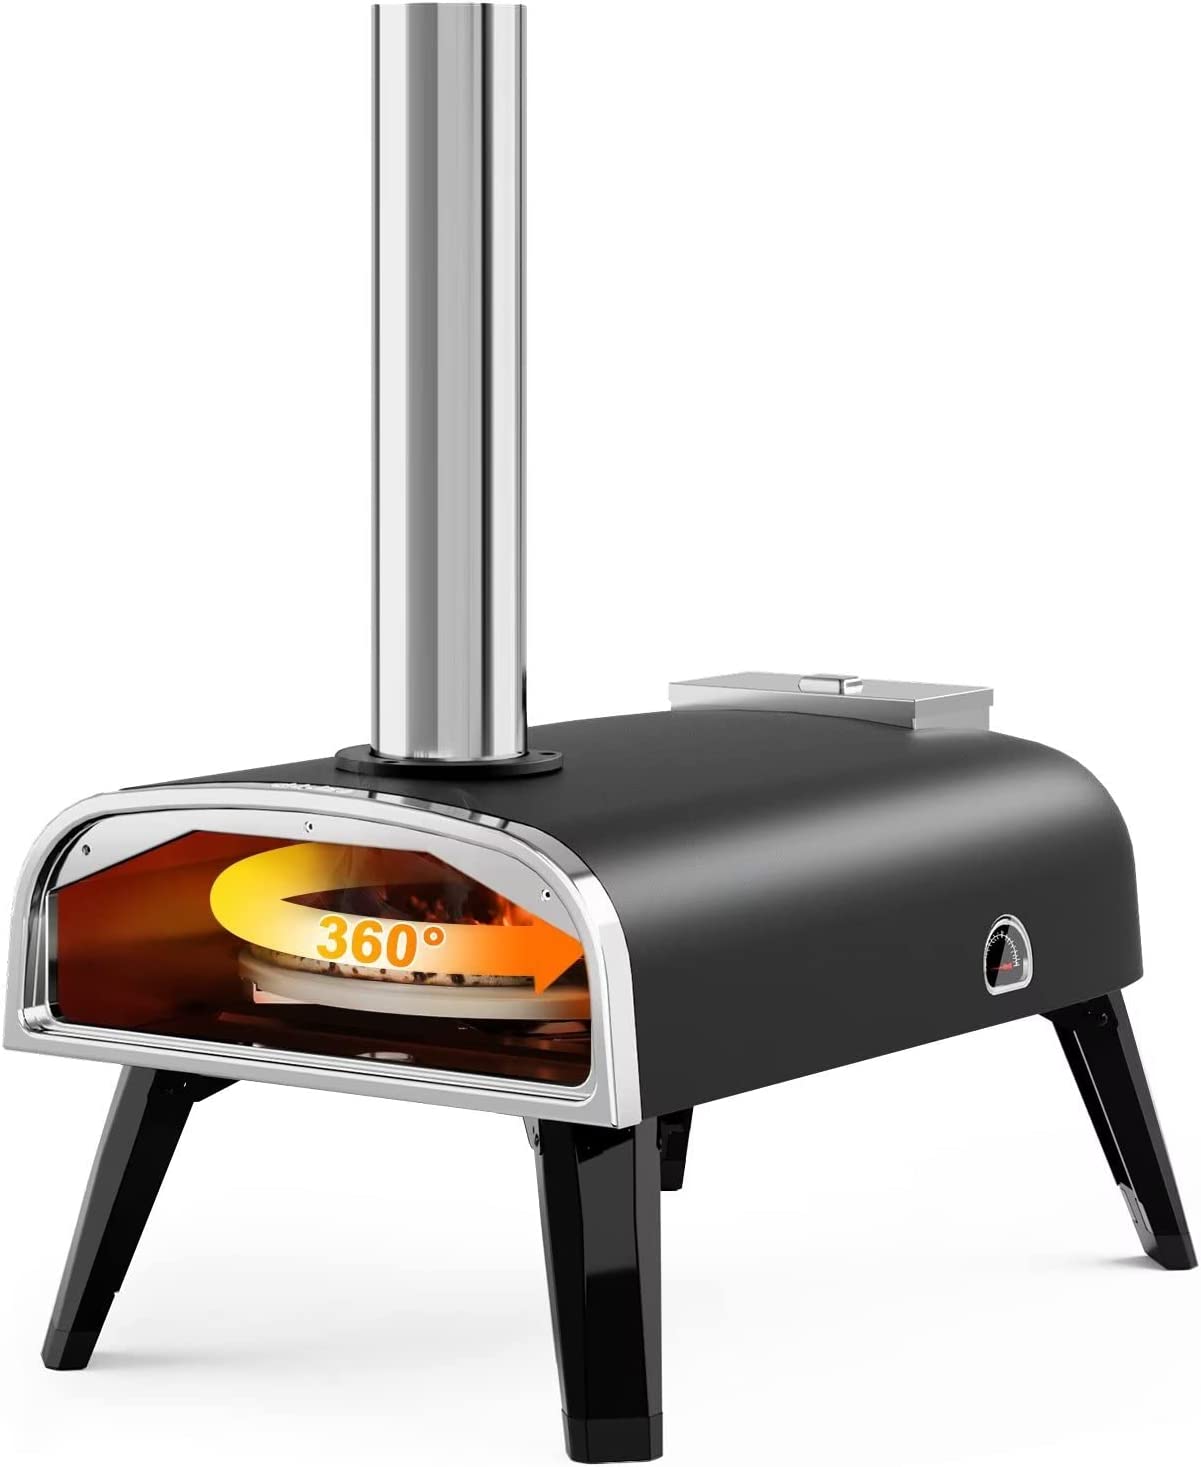 Outsunny Outdoor Portable Pizza Oven Pellet Pizza Maker w/ Thermometer,  Pizza Stone Anti-scald Handles Stainless Steel Body, for Garden Backyard  Camping Cooking Body